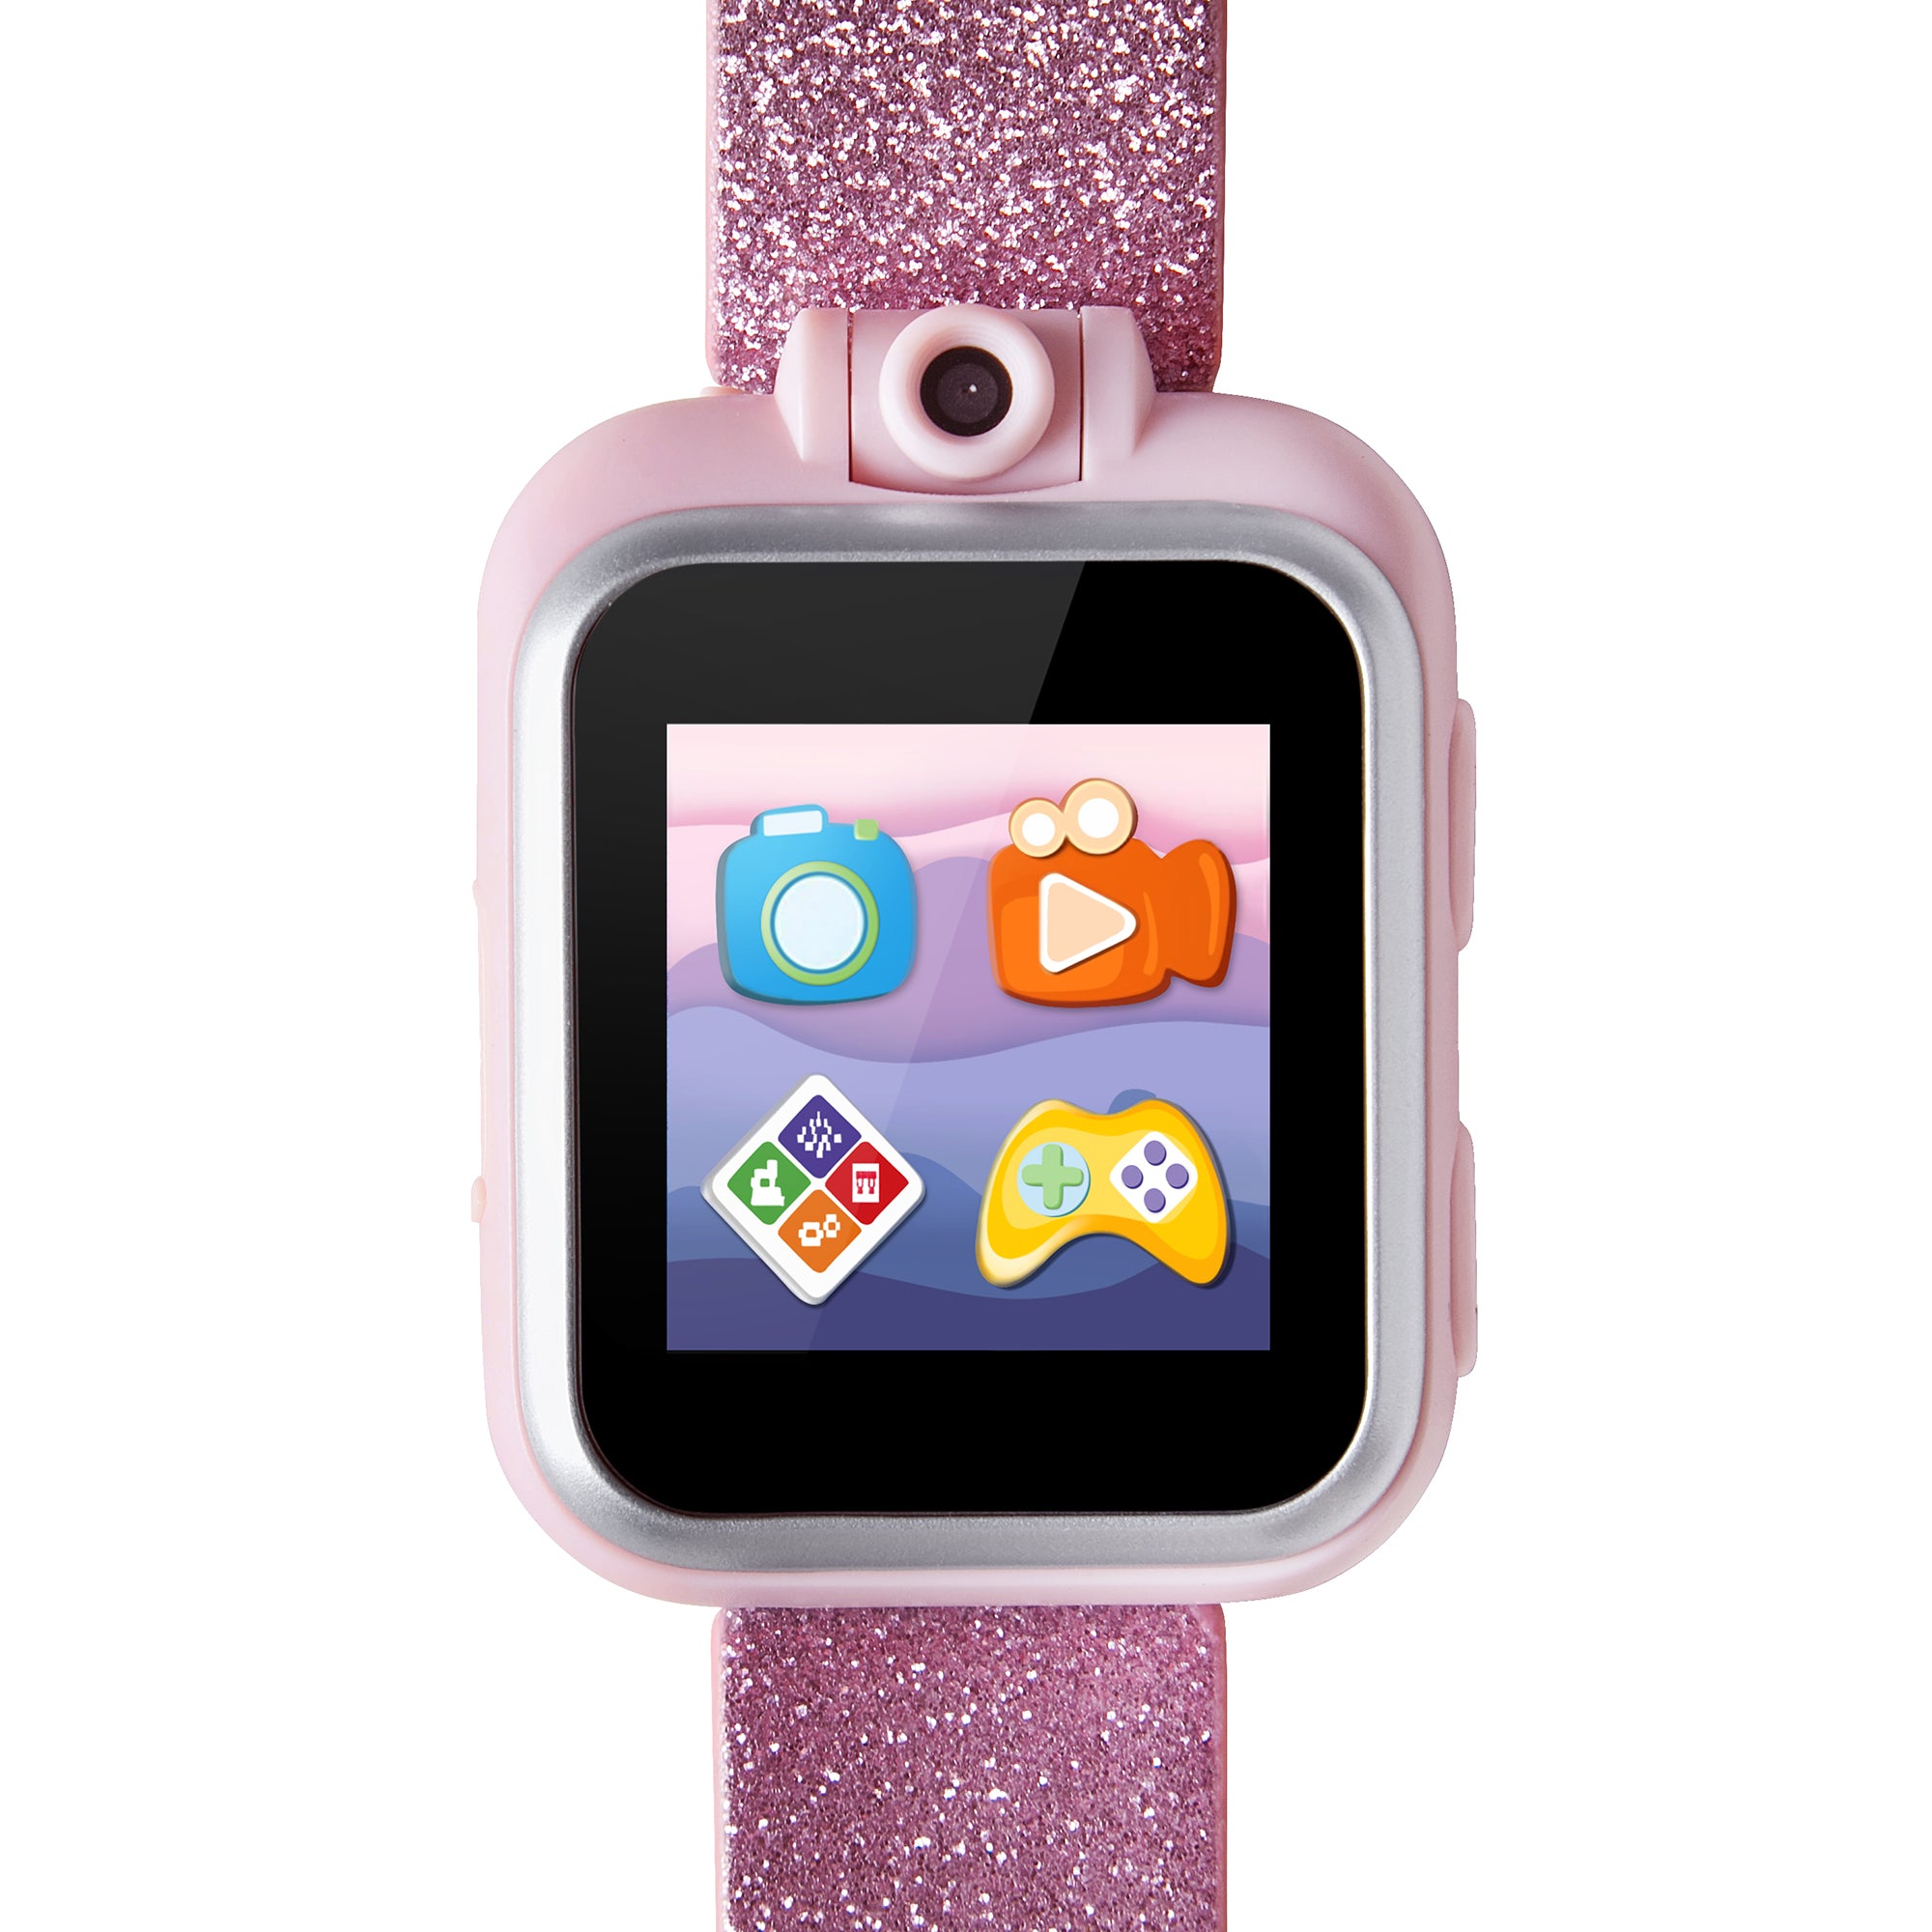 PlayZoom 2 Kids Smartwatch & Earbuds Set: Pastel Blue and Pink Glitter